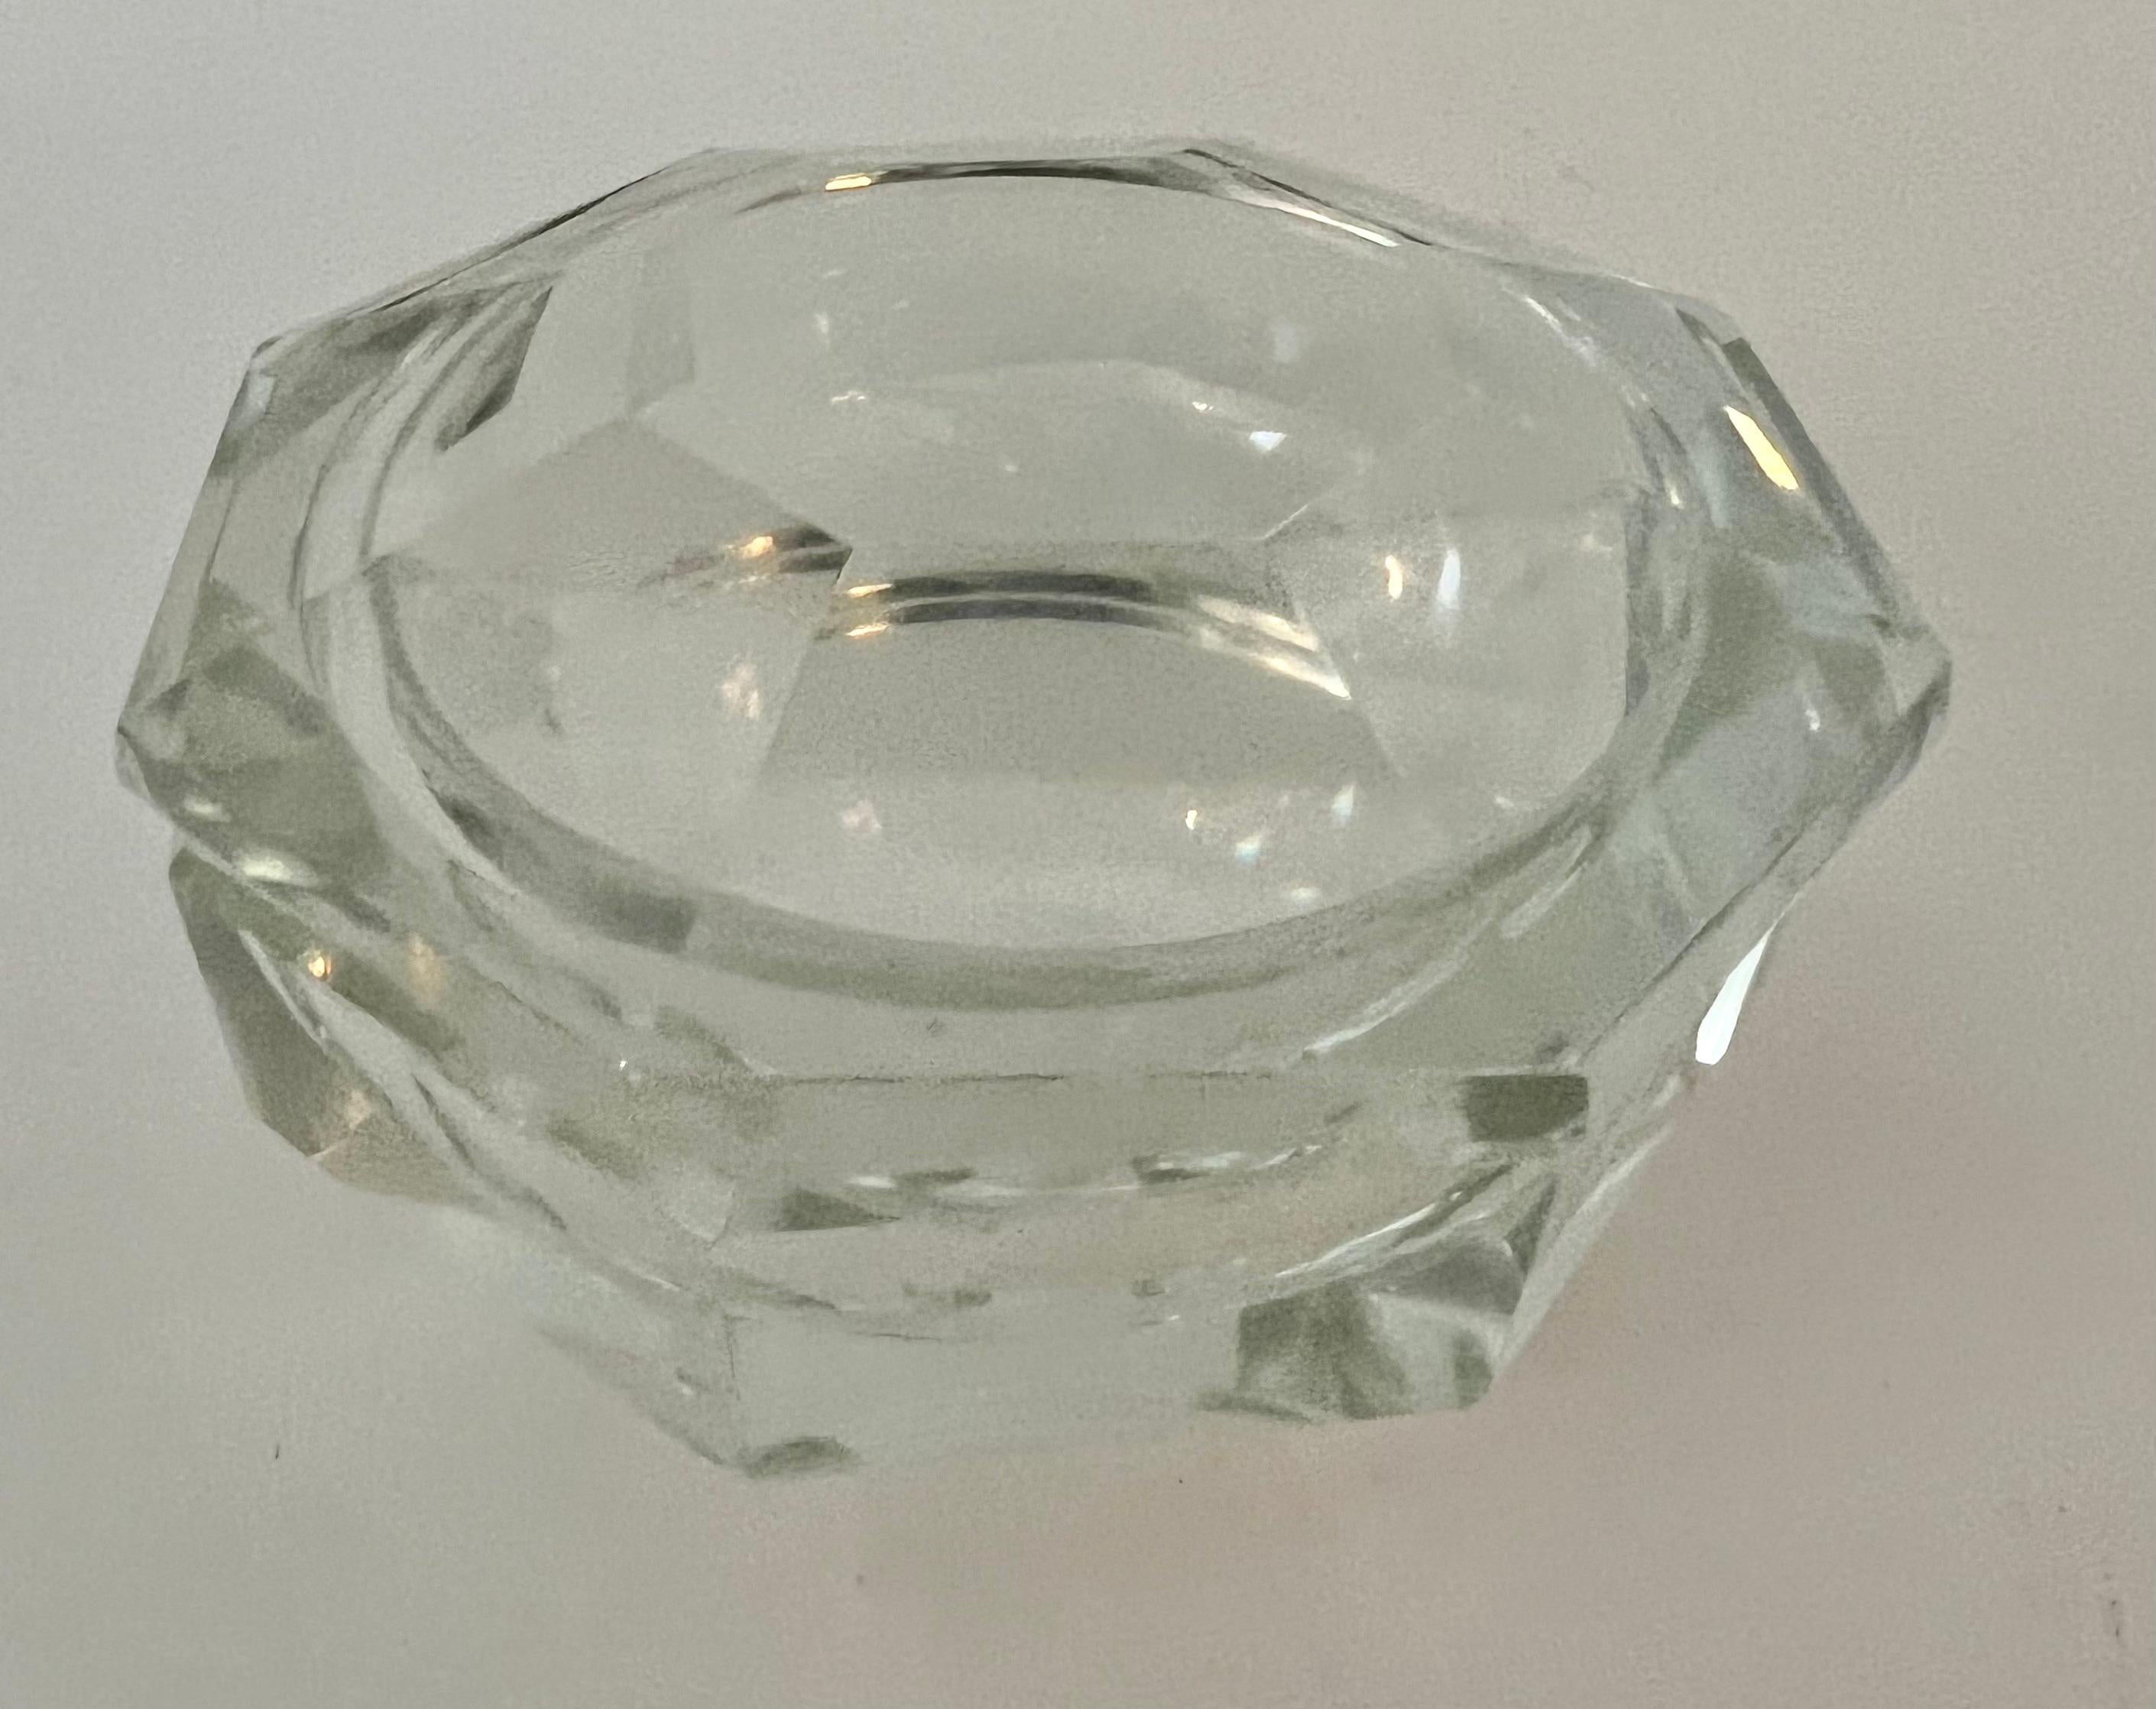 An octagonal crystal bowl with an octagonal lid. A very unique design and a compliment to any cocktail table - the piece is a nice decorative item or works well as a bowl for candy and nuts. Also works well on a desk or work station.